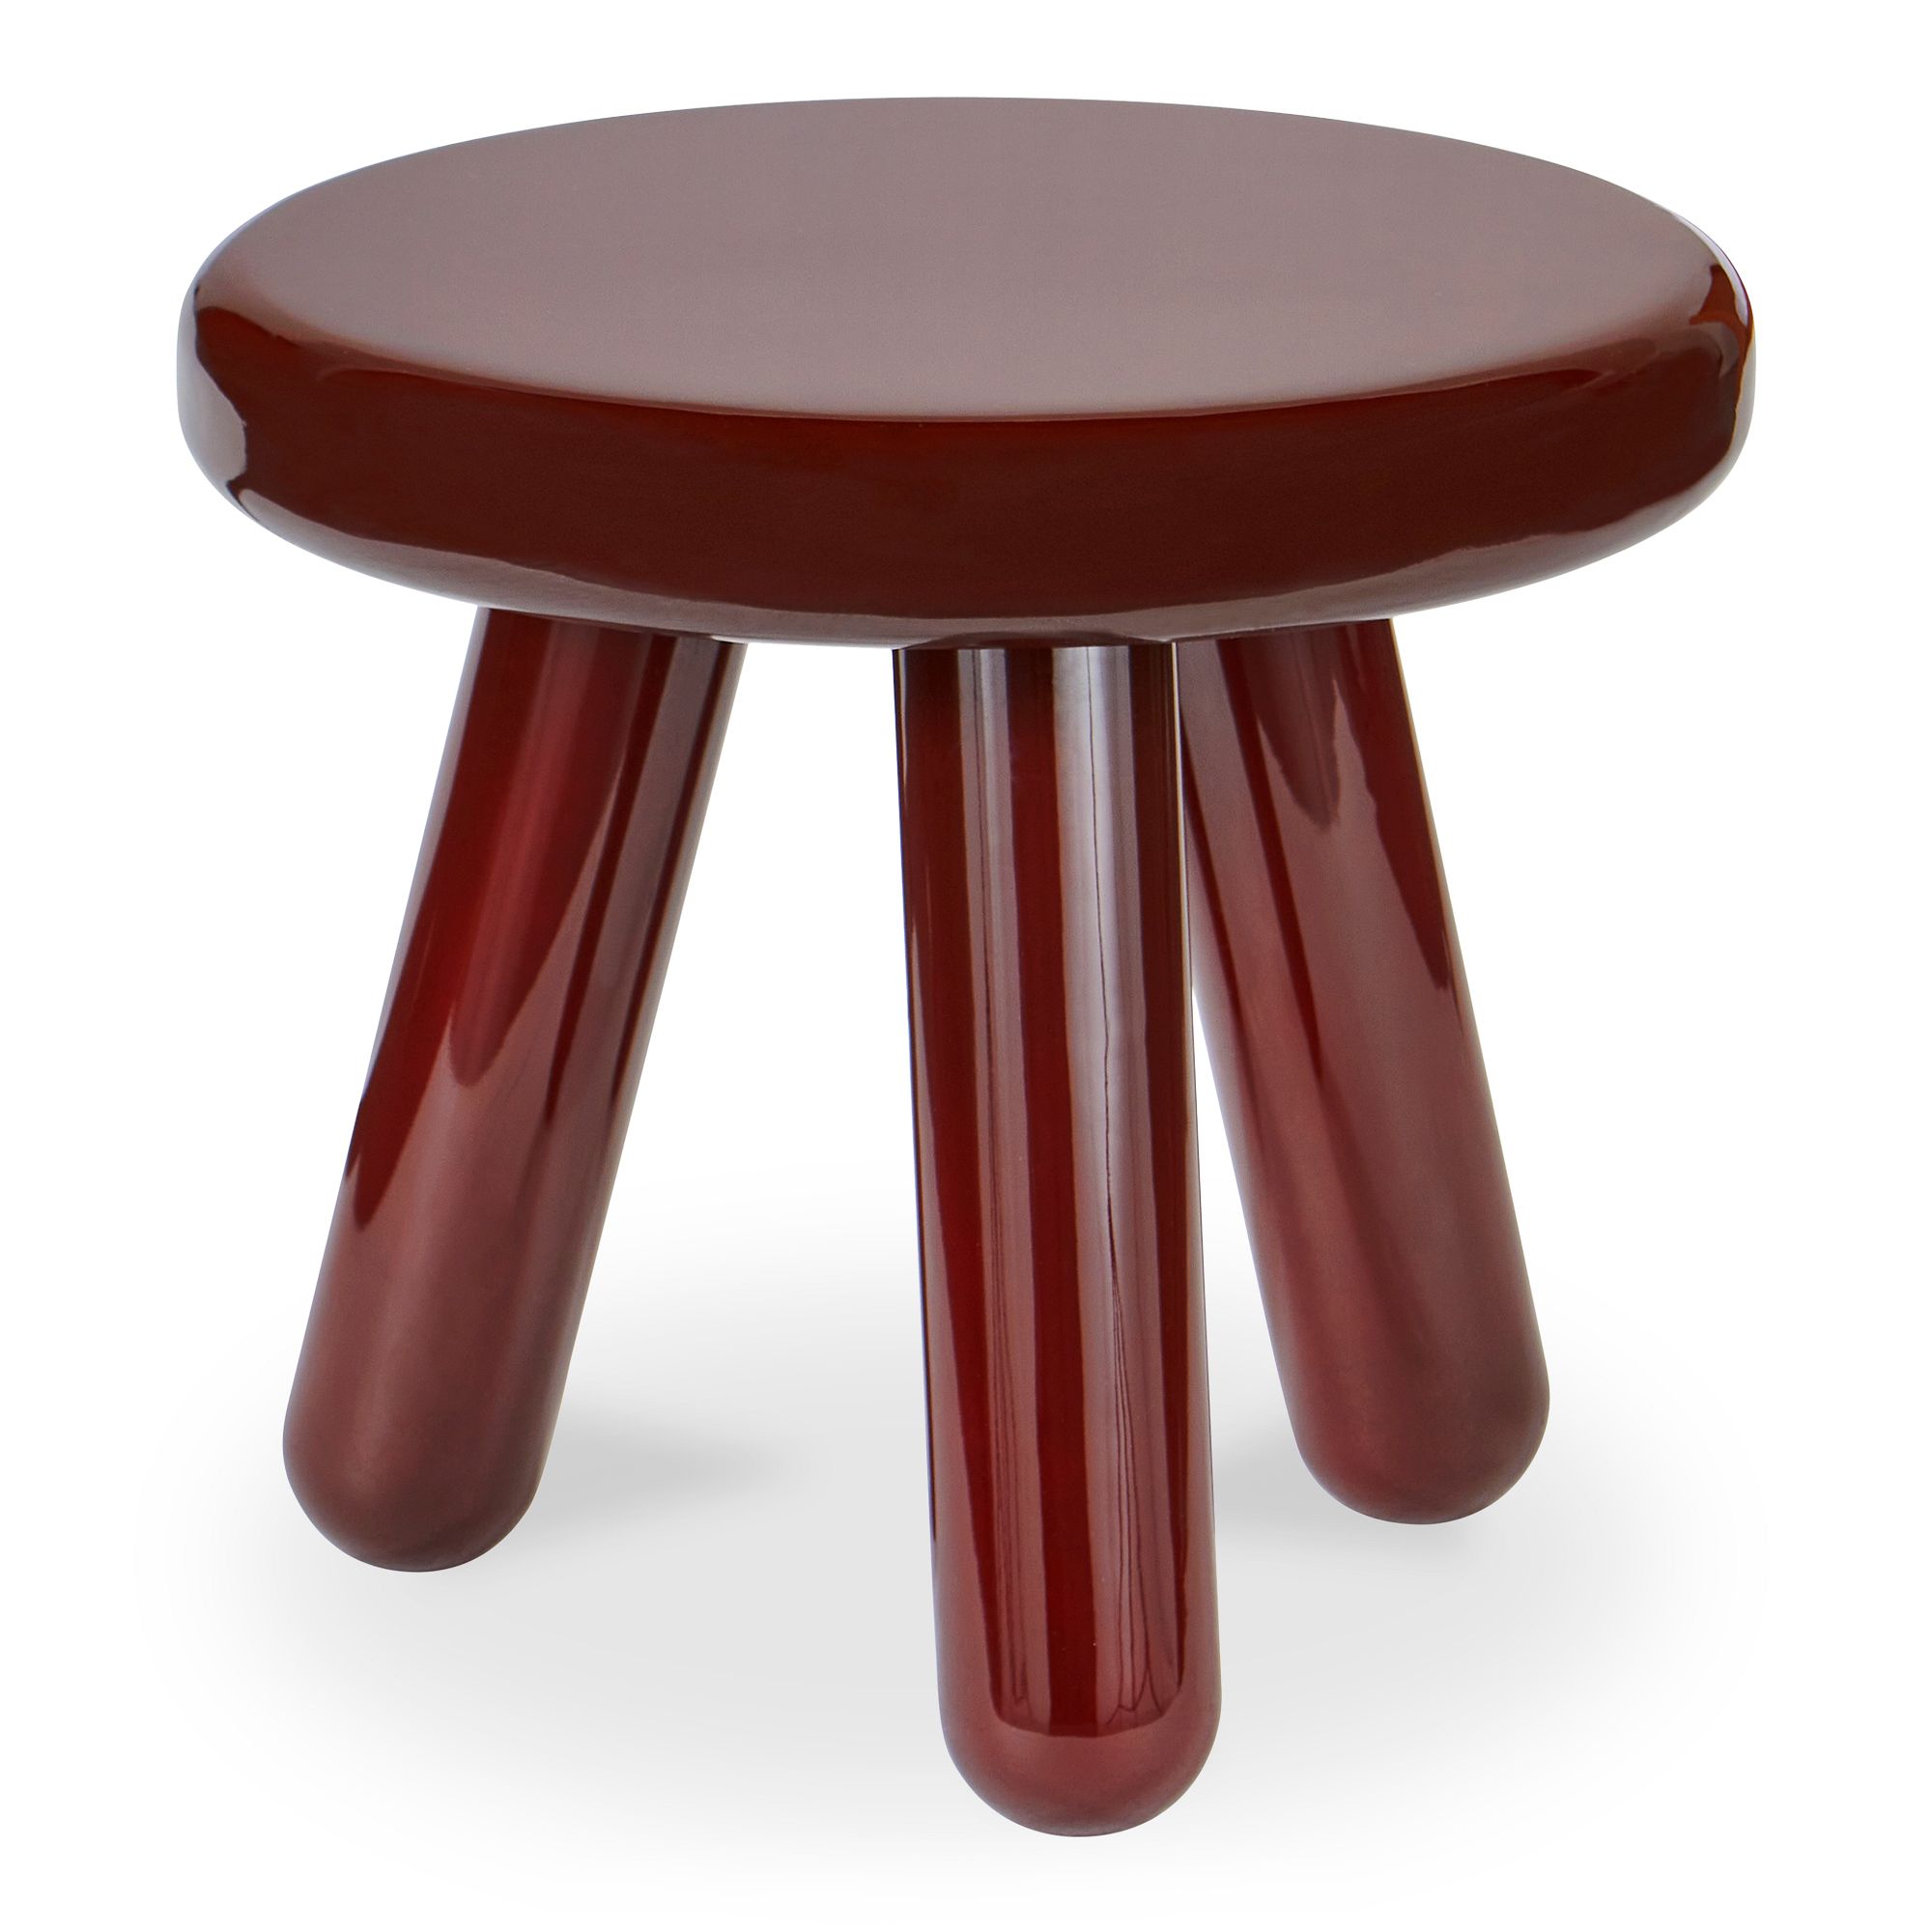 Anshul Lacquer Side Table (19") | West Elm